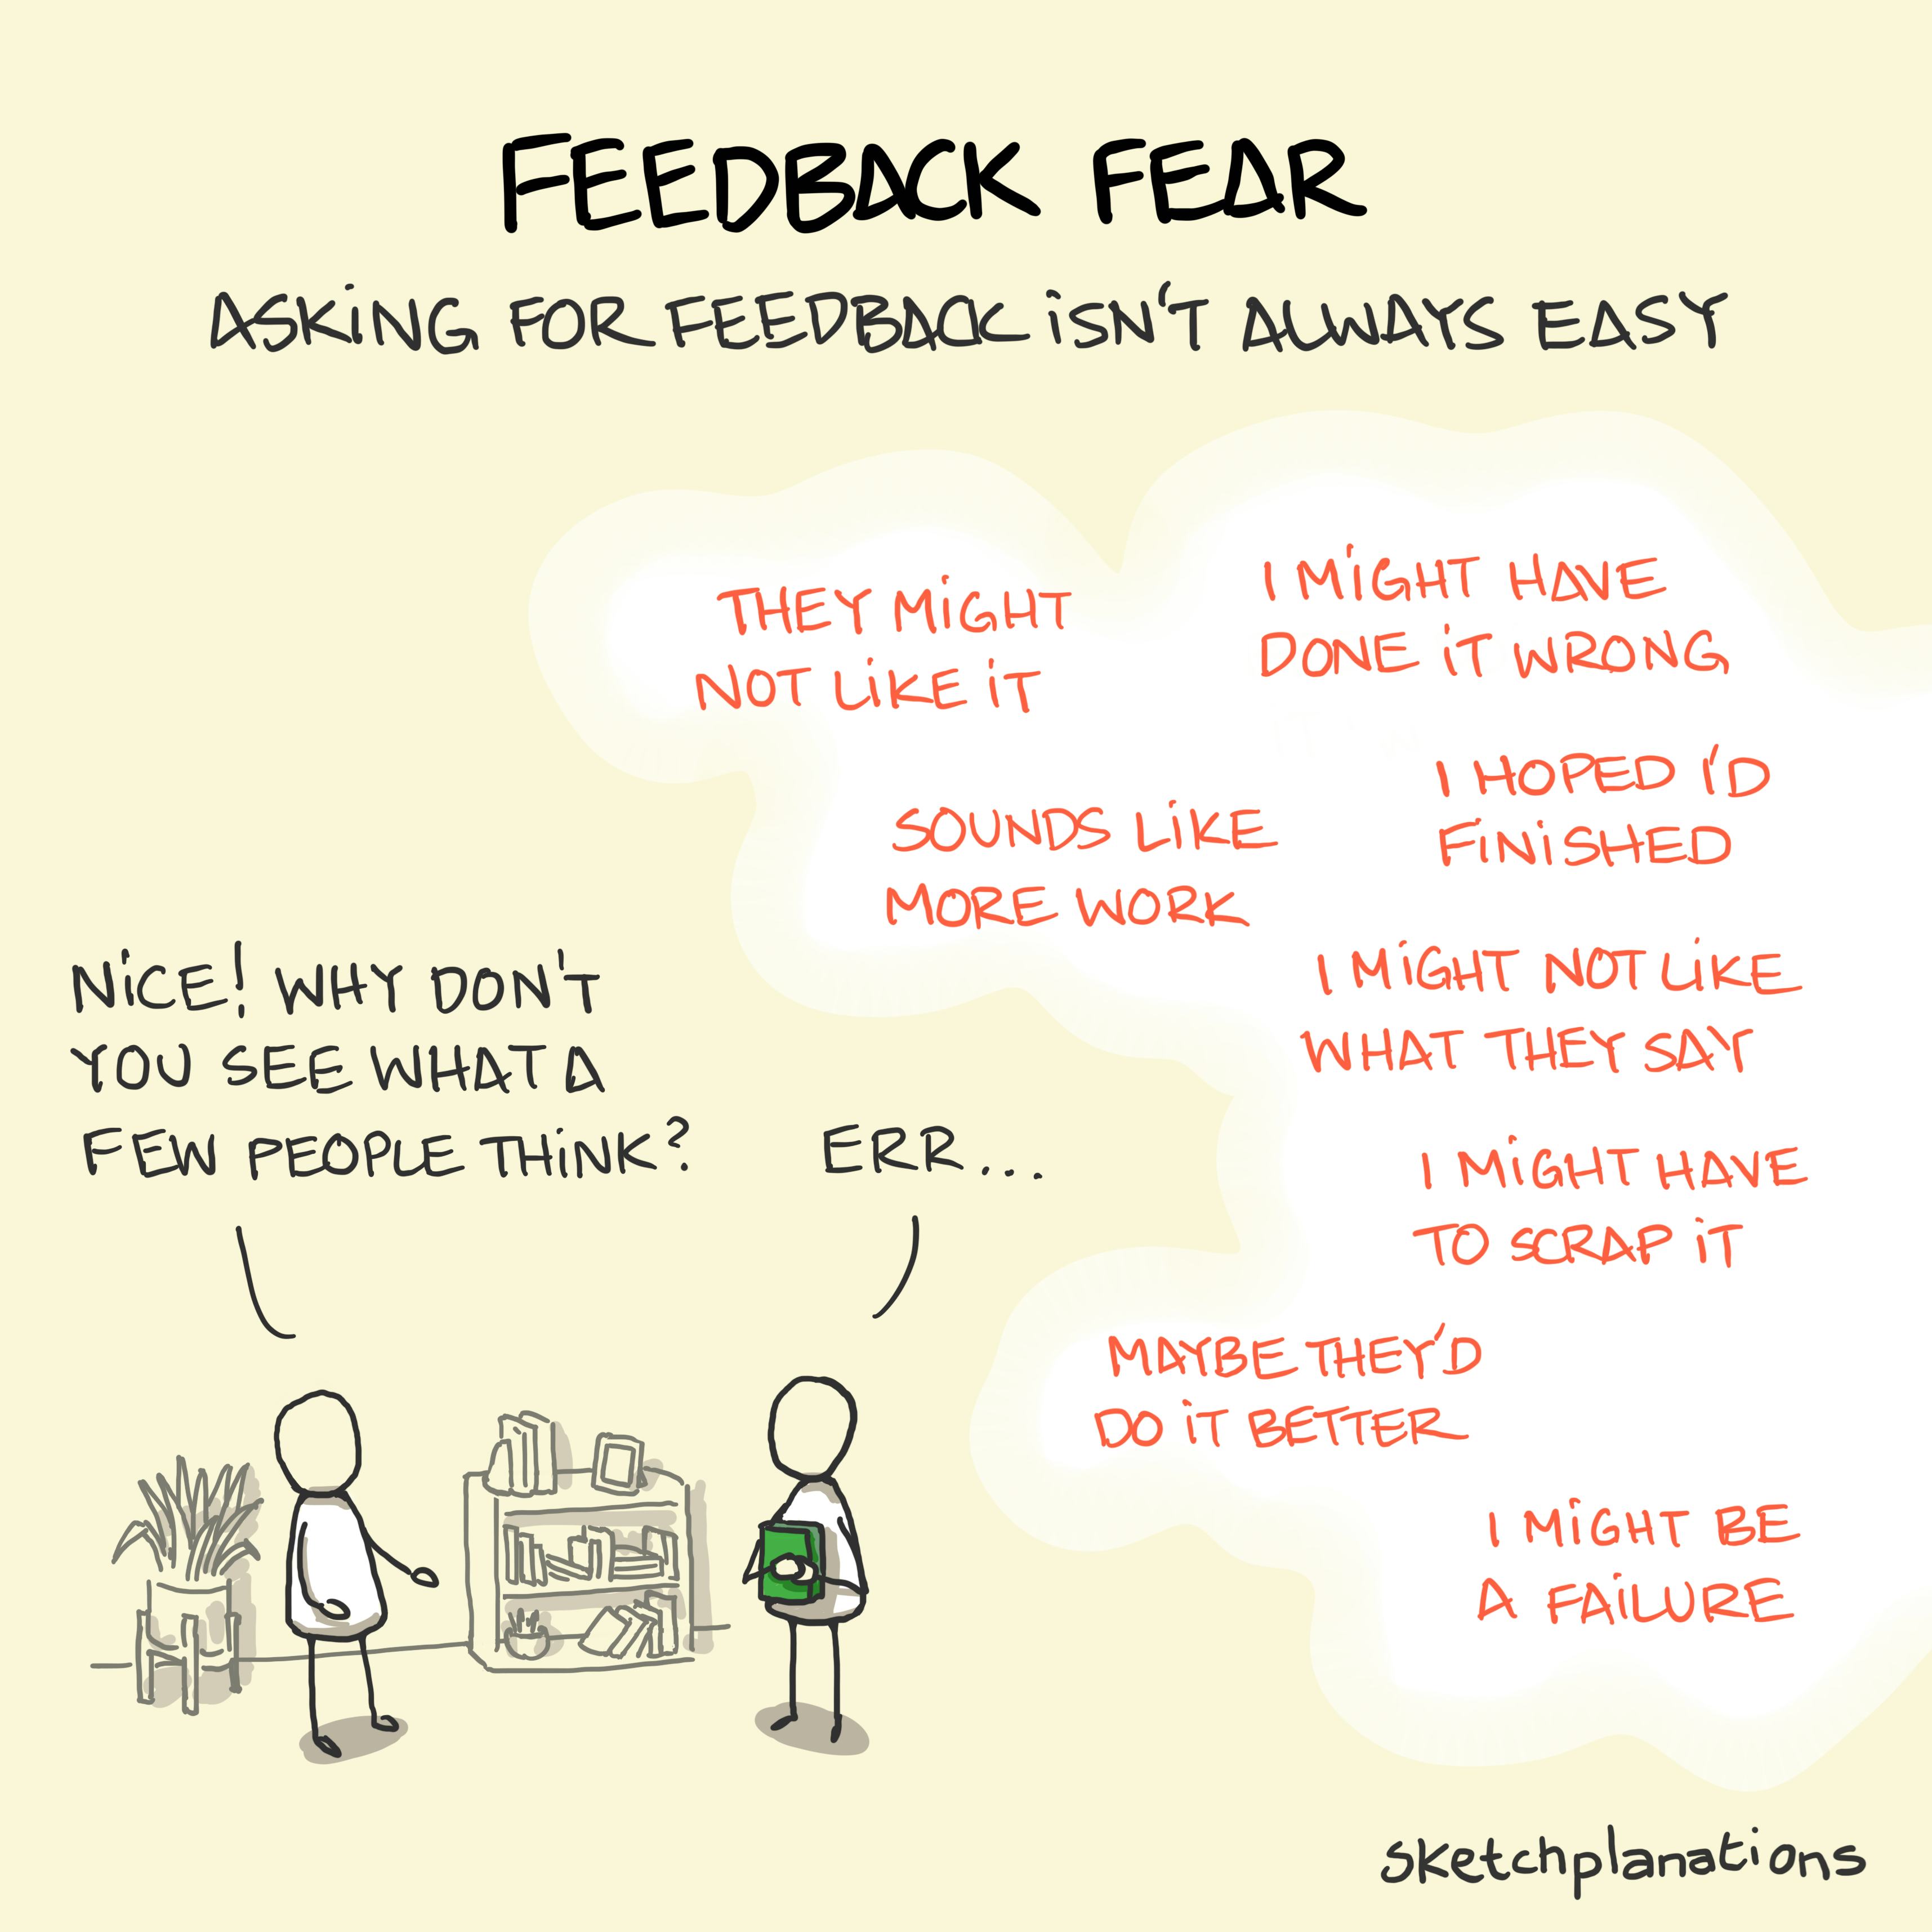 Feedback fear illustration: A poor soul goes through all sorts of internal doubts about what they might have done wrong and how they might have failed when someone gives a friendly suggestion to ask what others think